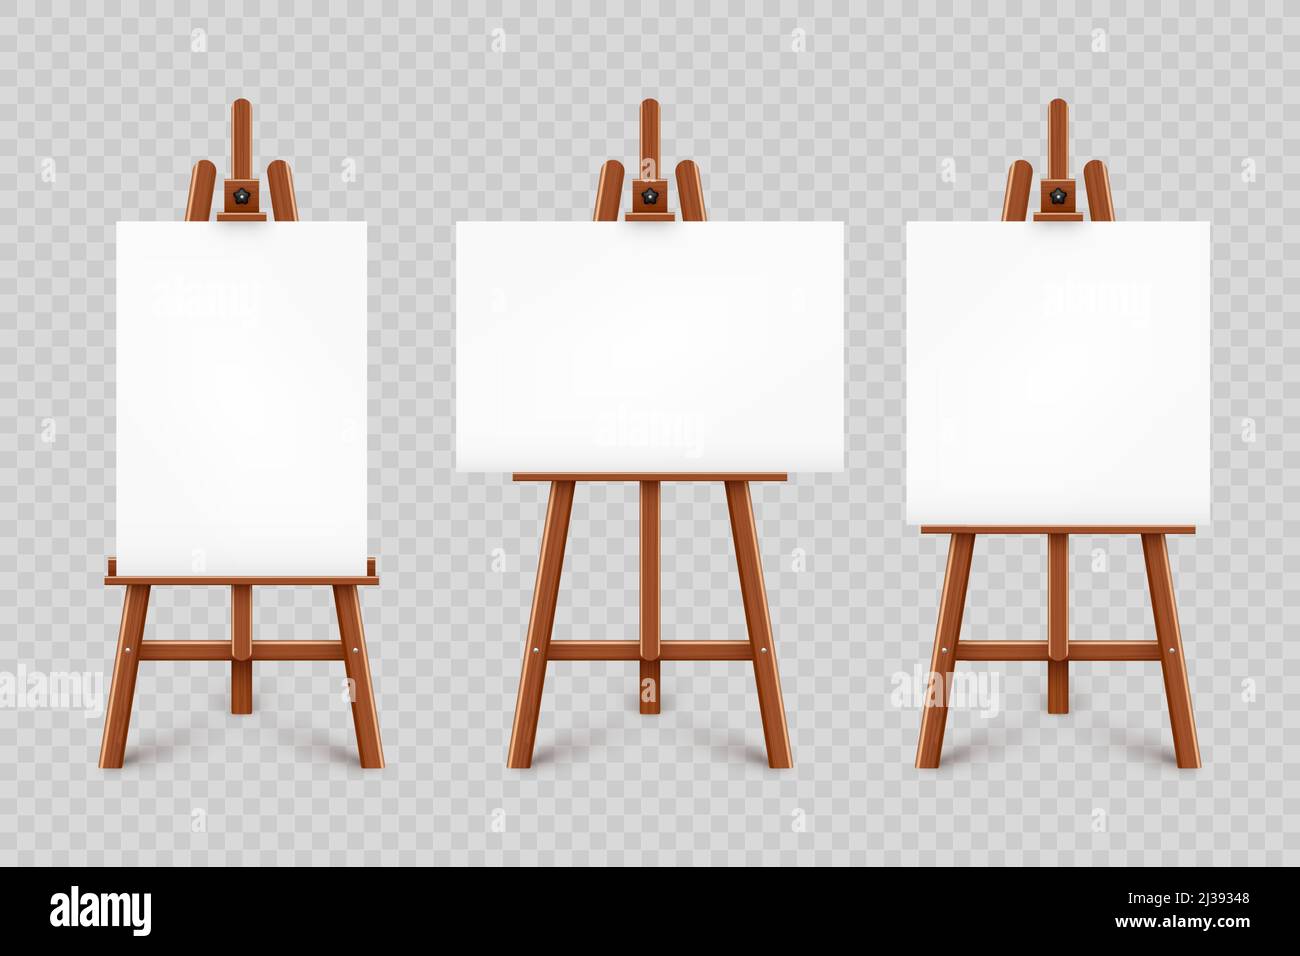 Table Top Easle with Blank Paper Stock Image - Image of easel